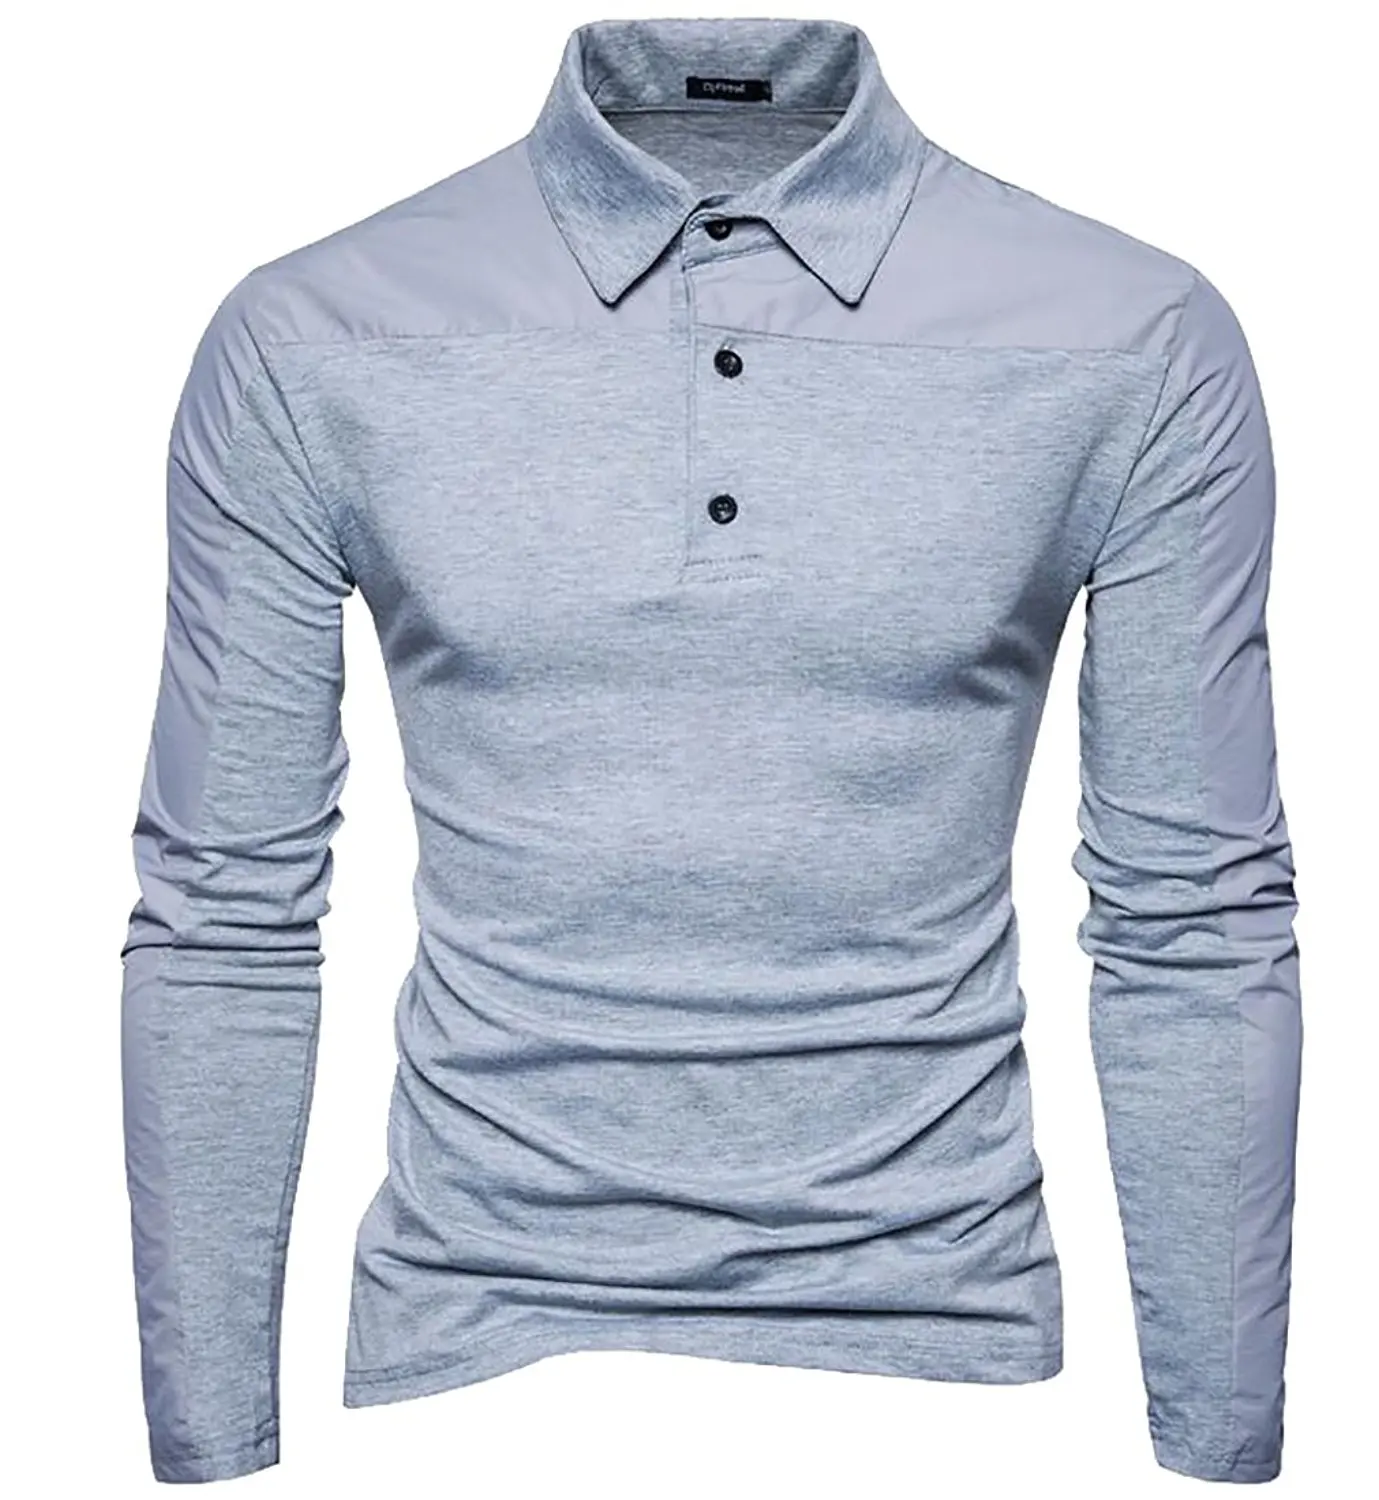 Cheap Two Tone Shirts Men, find Two Tone Shirts Men deals on line at ...